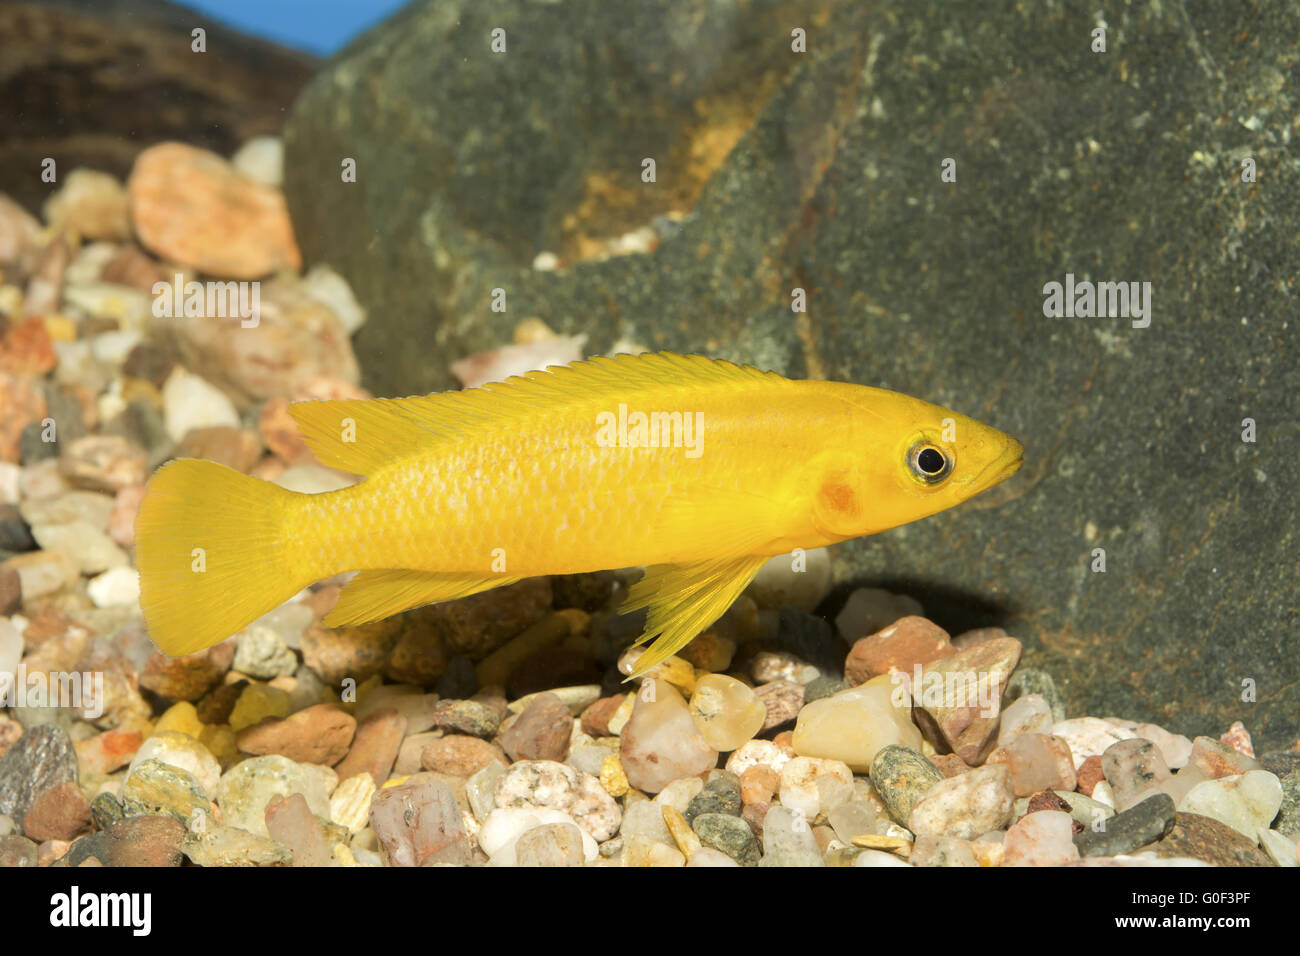 Cichlid fish from genus Neolamprologus Stock Photo